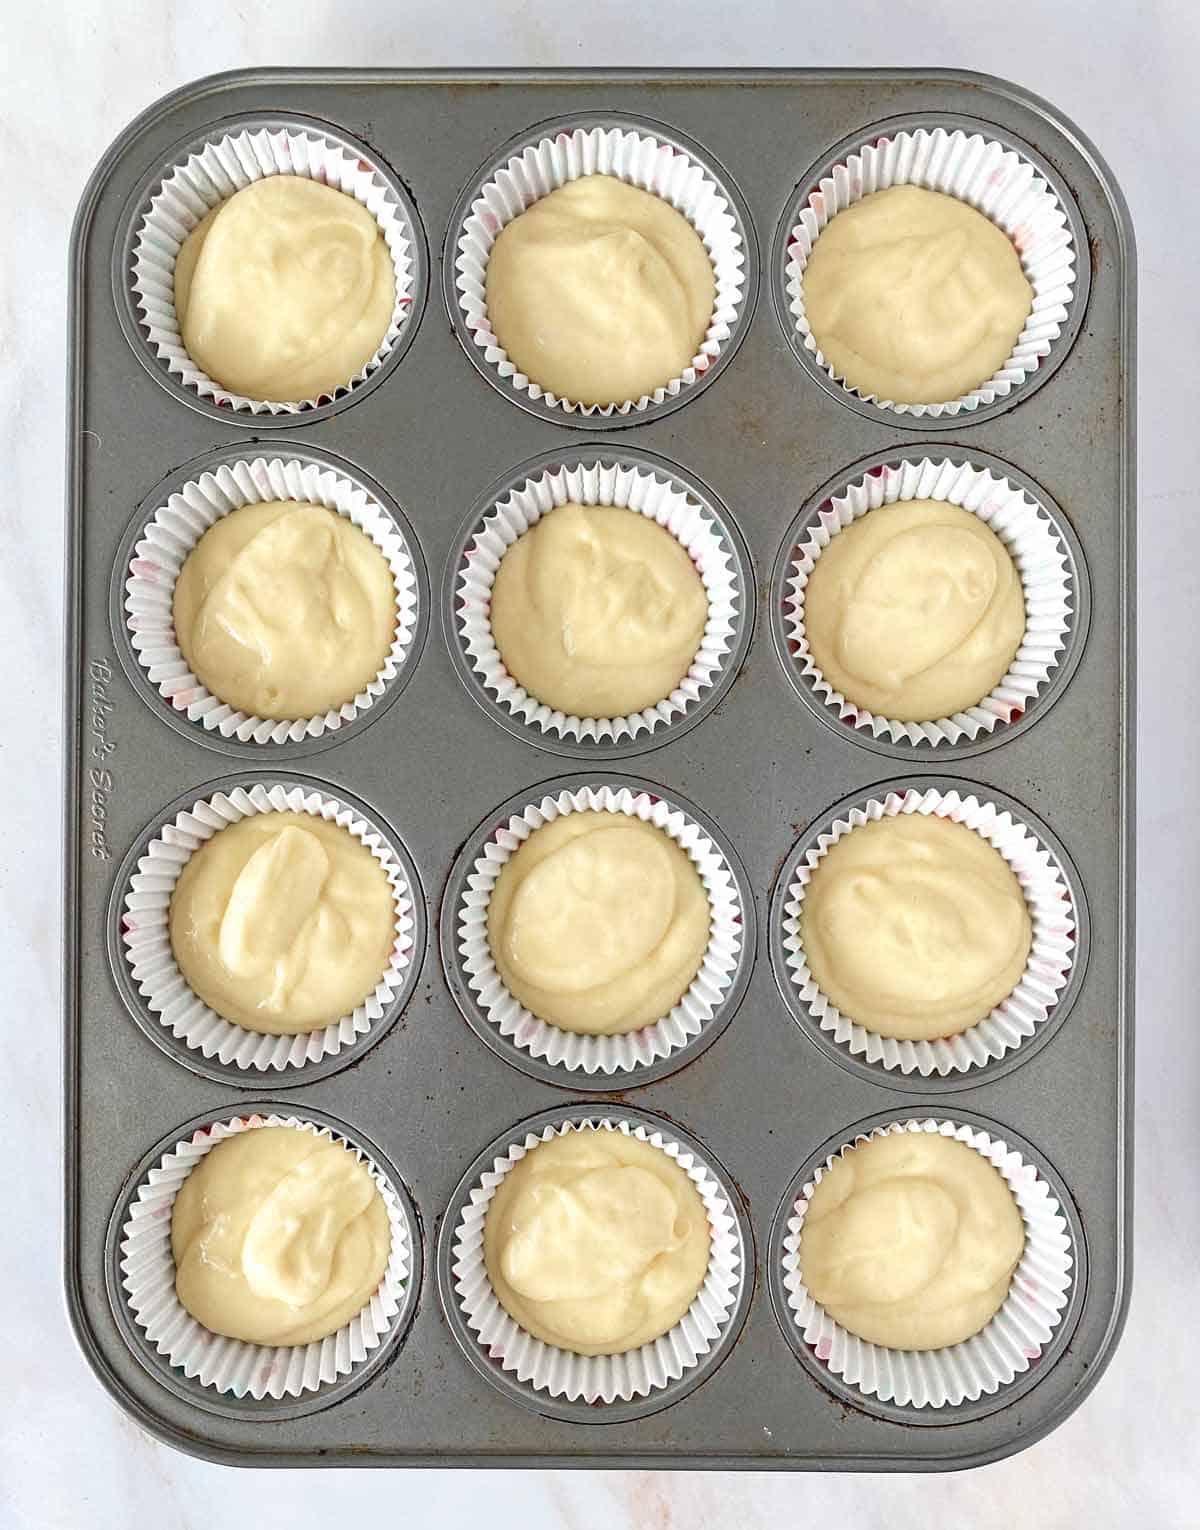 A cupcake pan with 12 paper liners filled with cupcake batter.